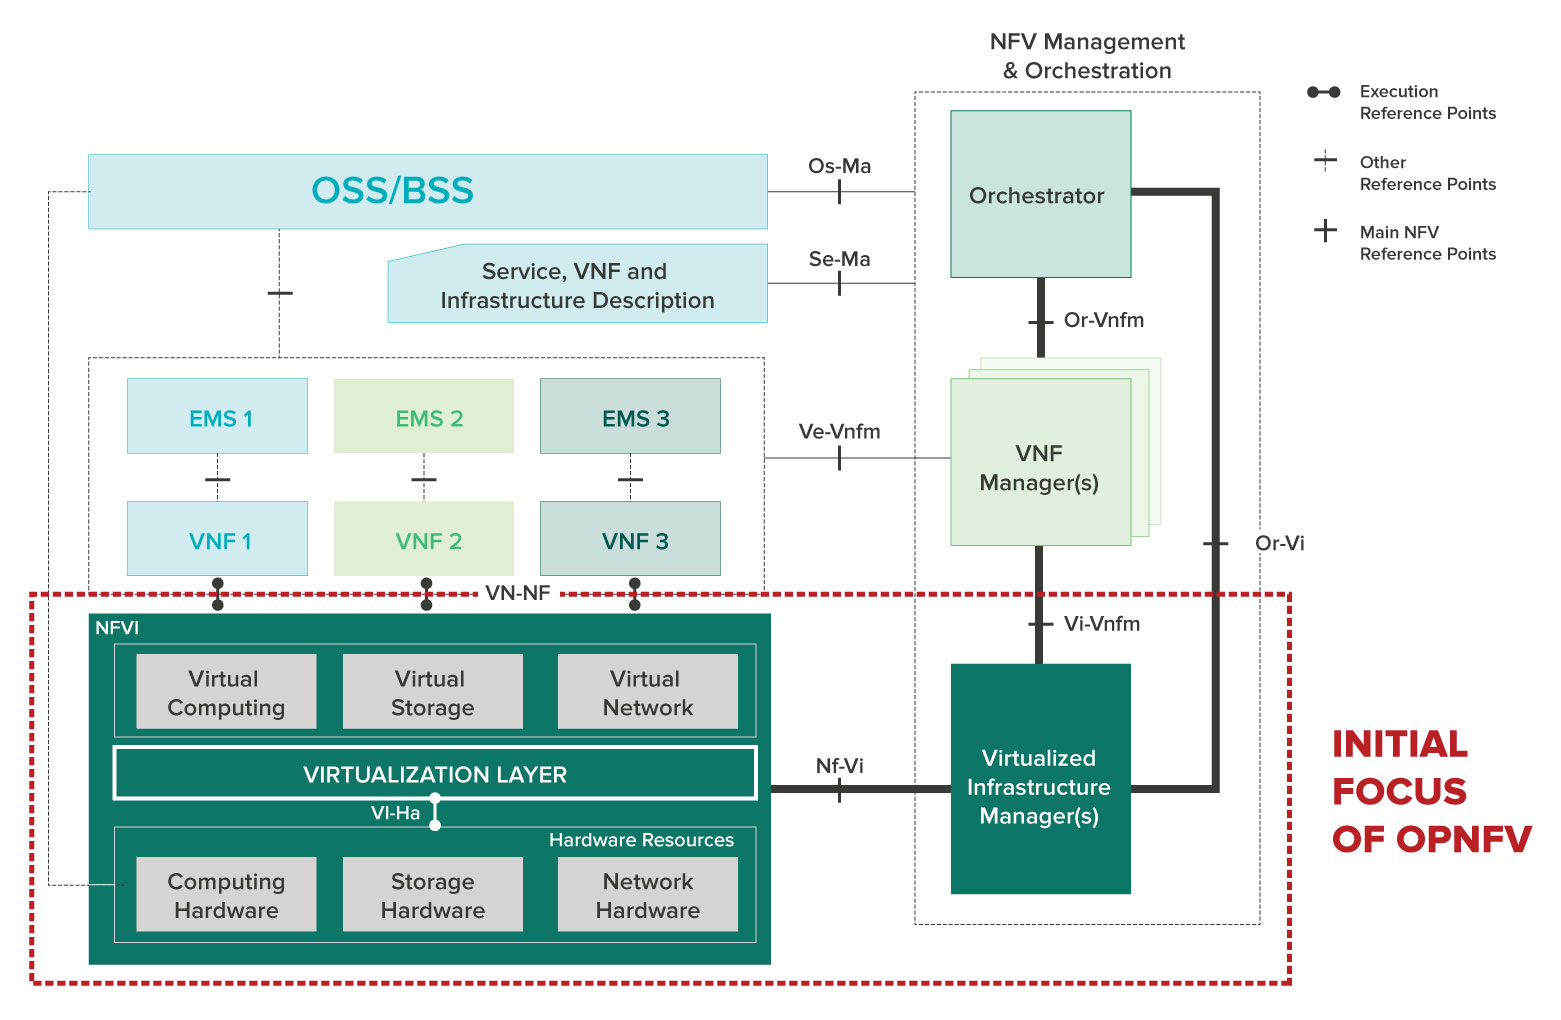 NFV Architecture Framework indicating OPNFV scope (in red)